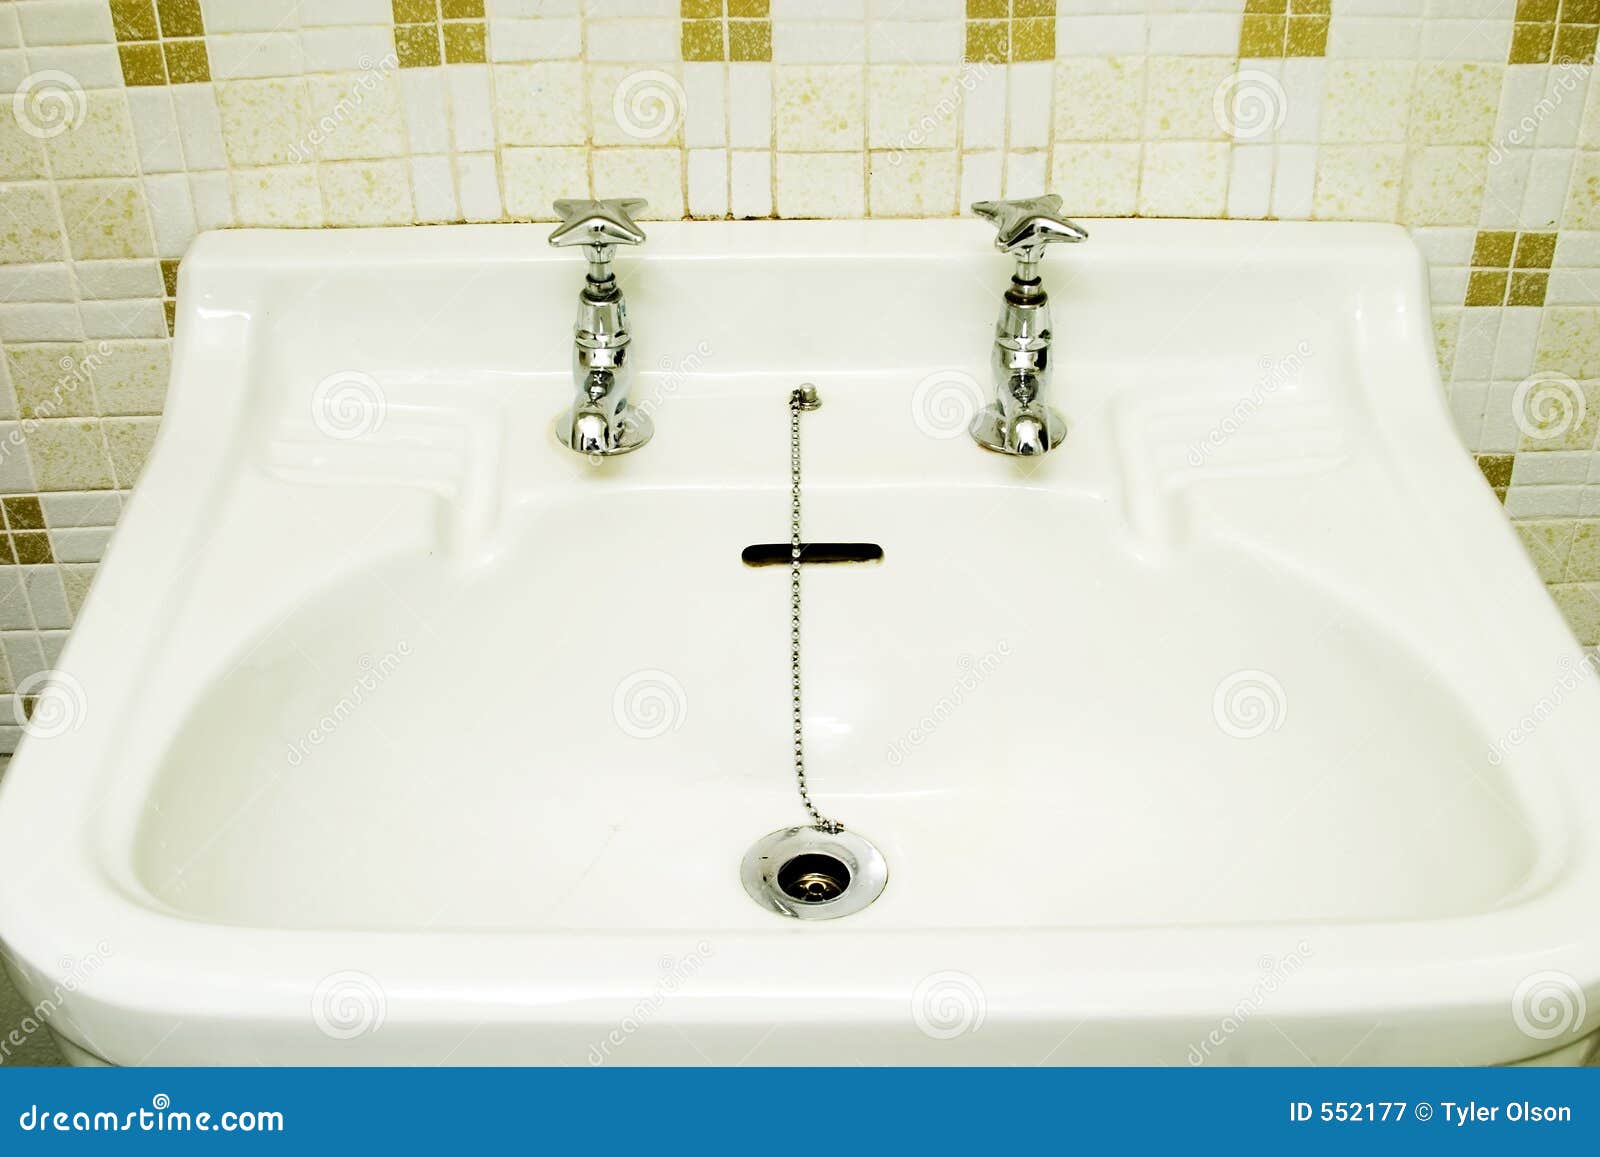 Old Fashioned Sink Royalty Free Stock Photography - Image ...
